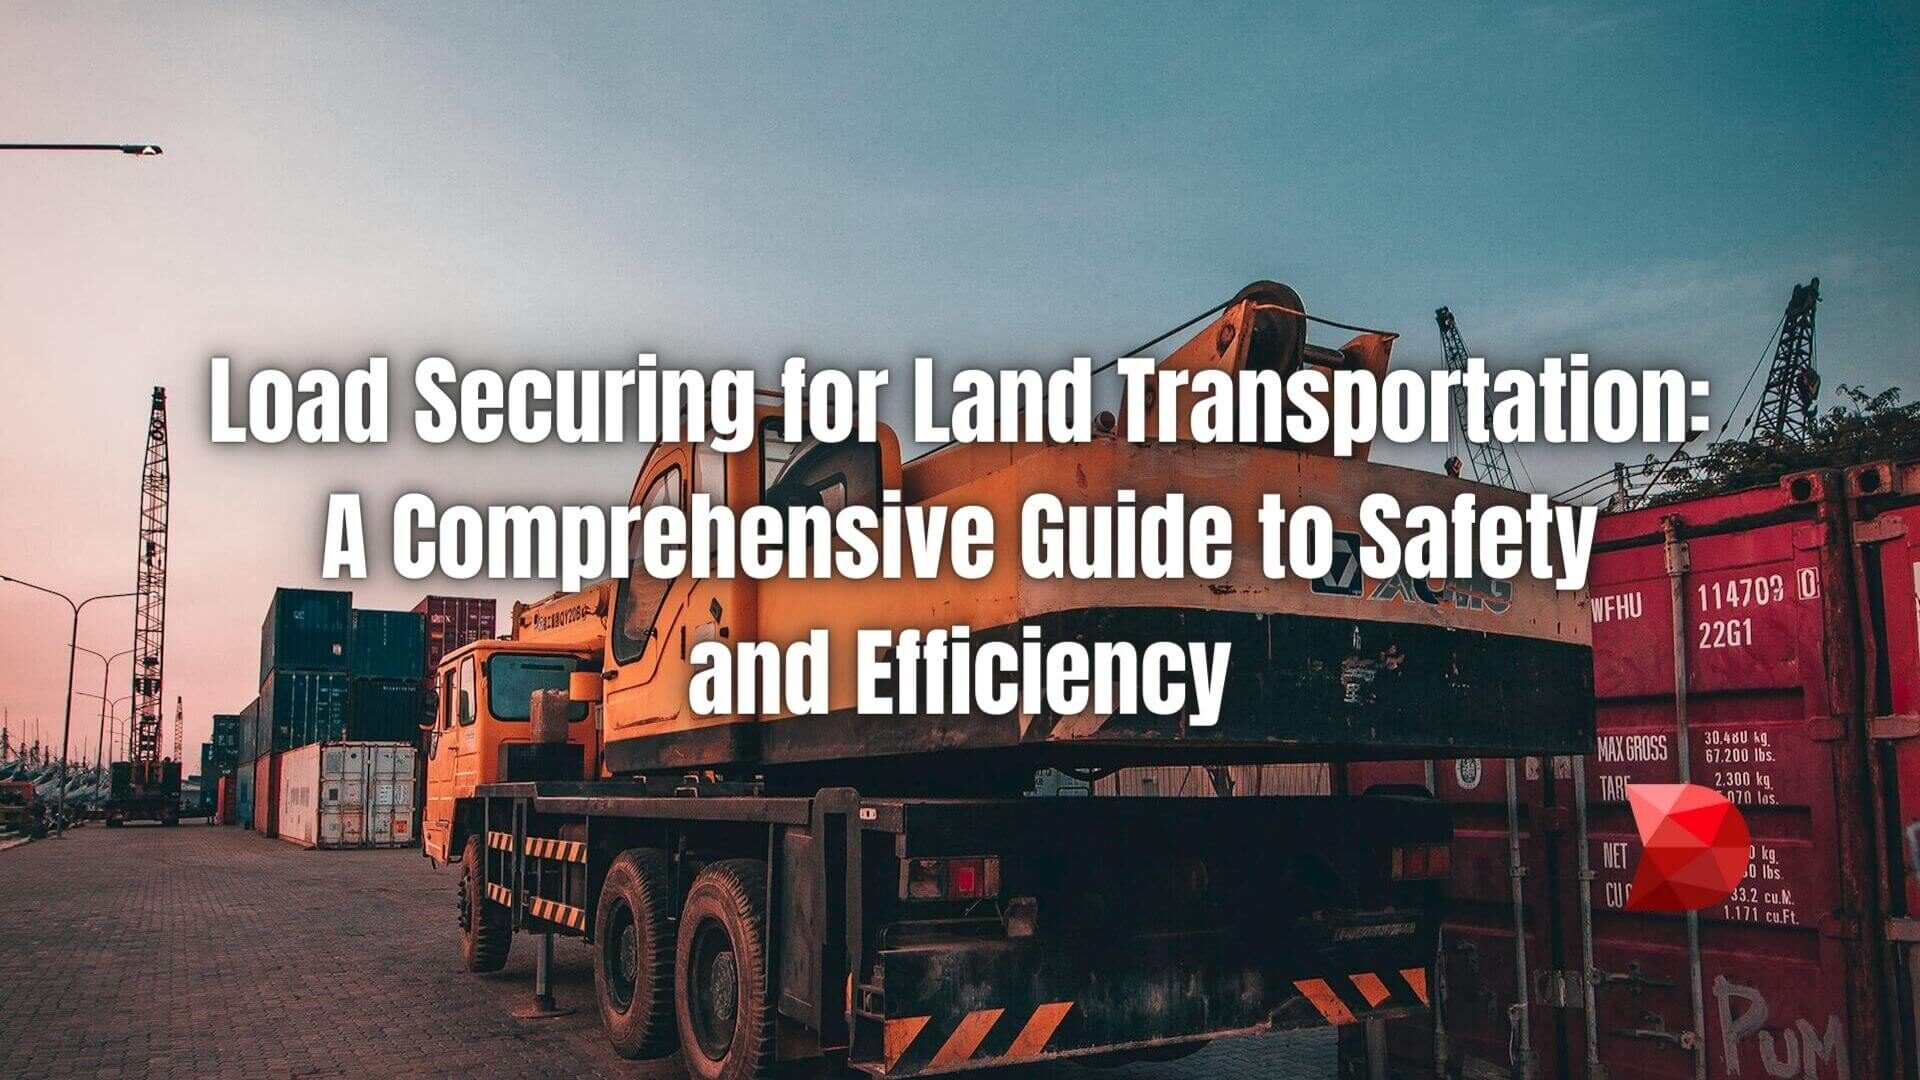 Master load securing techniques with this comprehensive guide for safe and efficient land transportation. Learn best practices today!